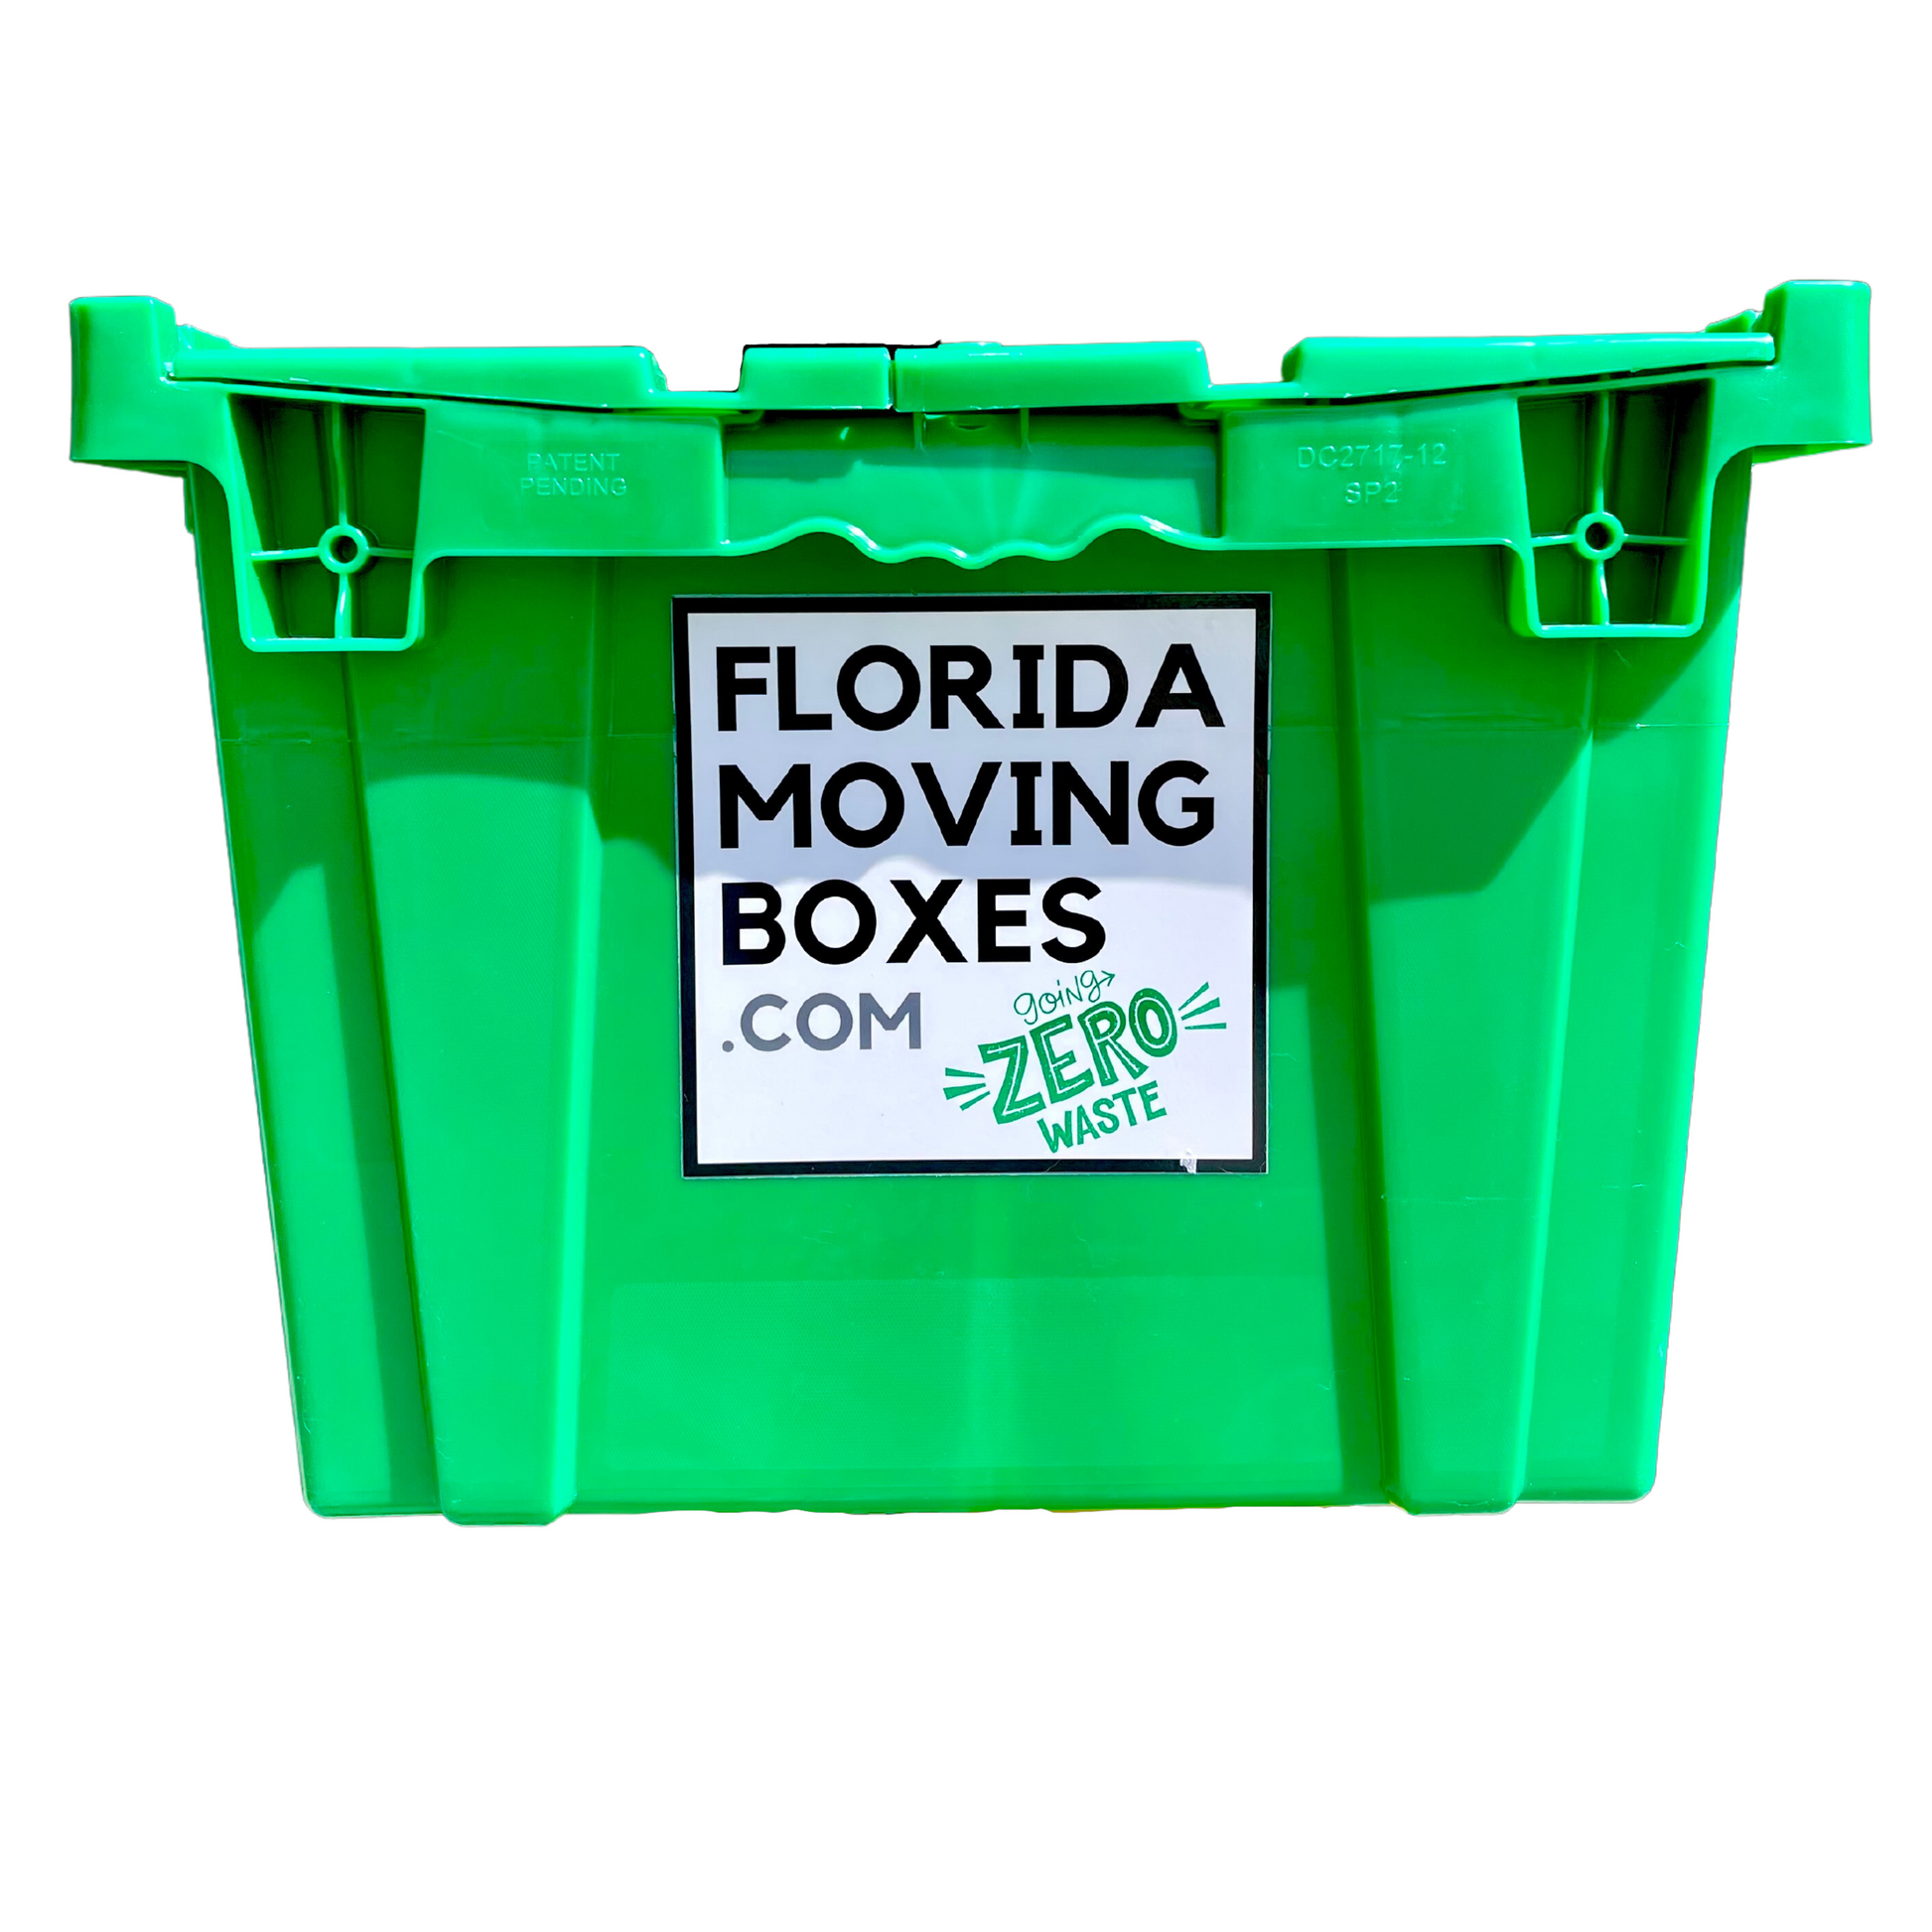 Small Business Package - 50 Moving Crates – Florida Moving Boxes